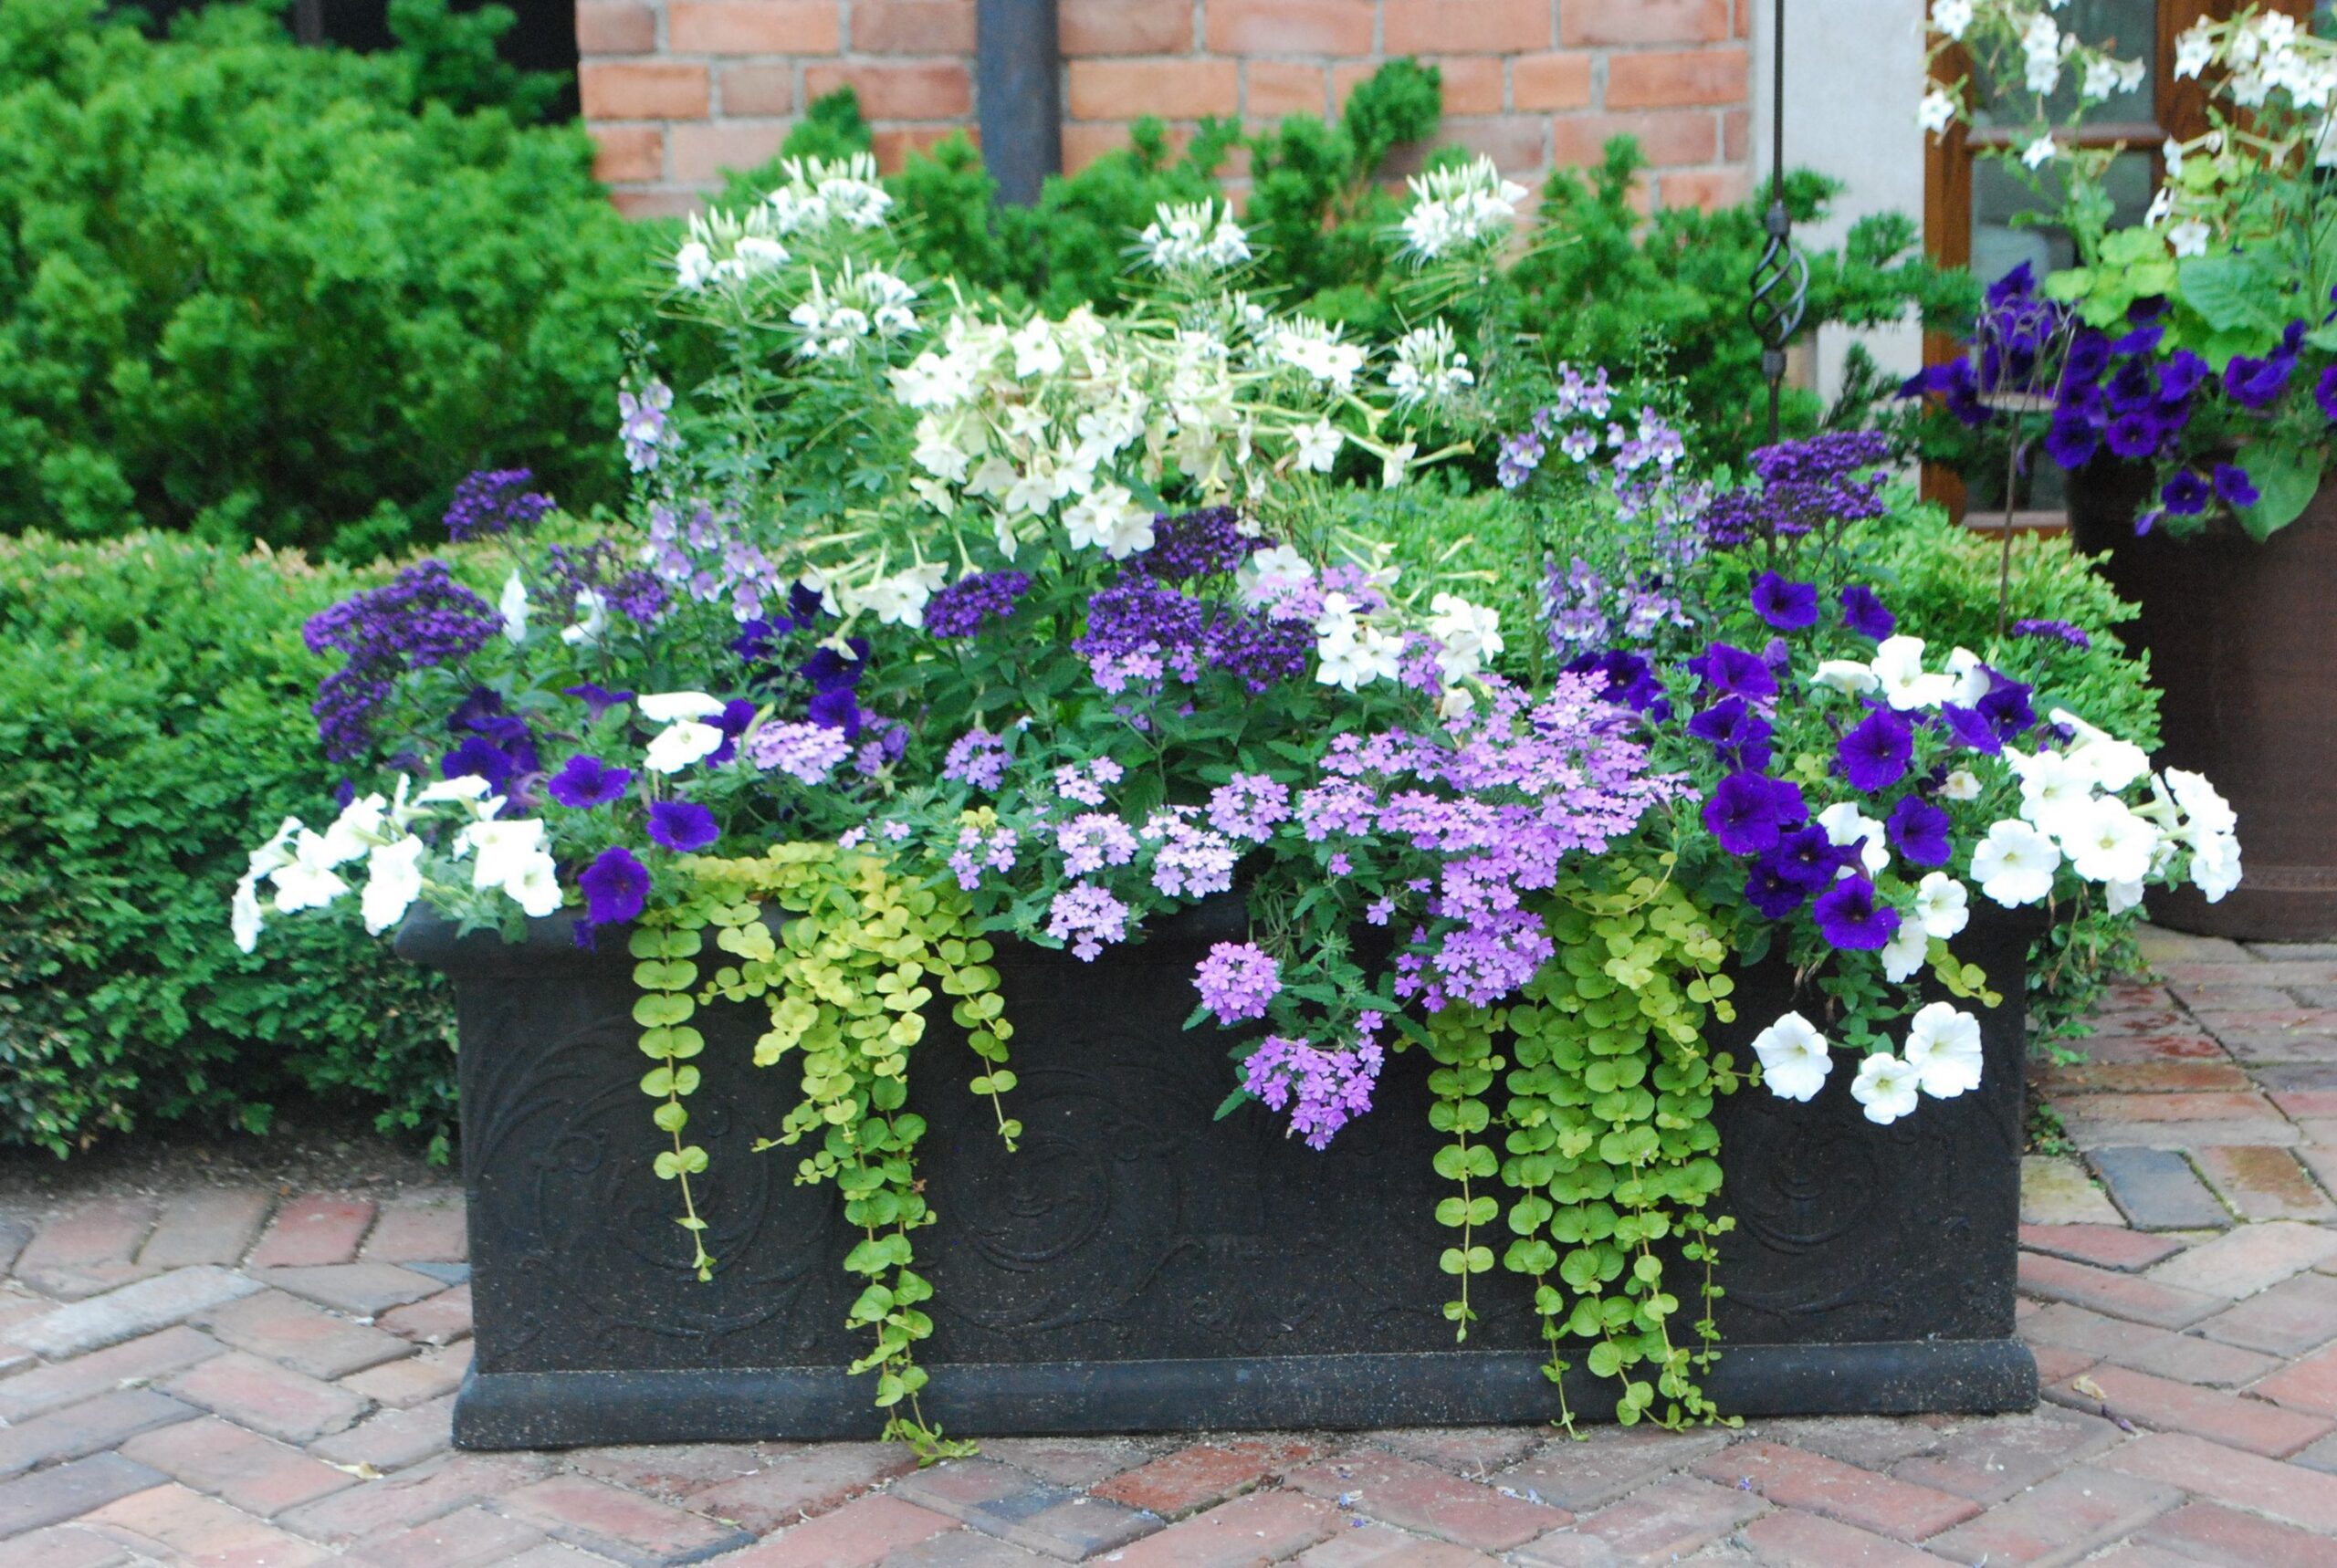 Amazing planter and pot designs for your backyard